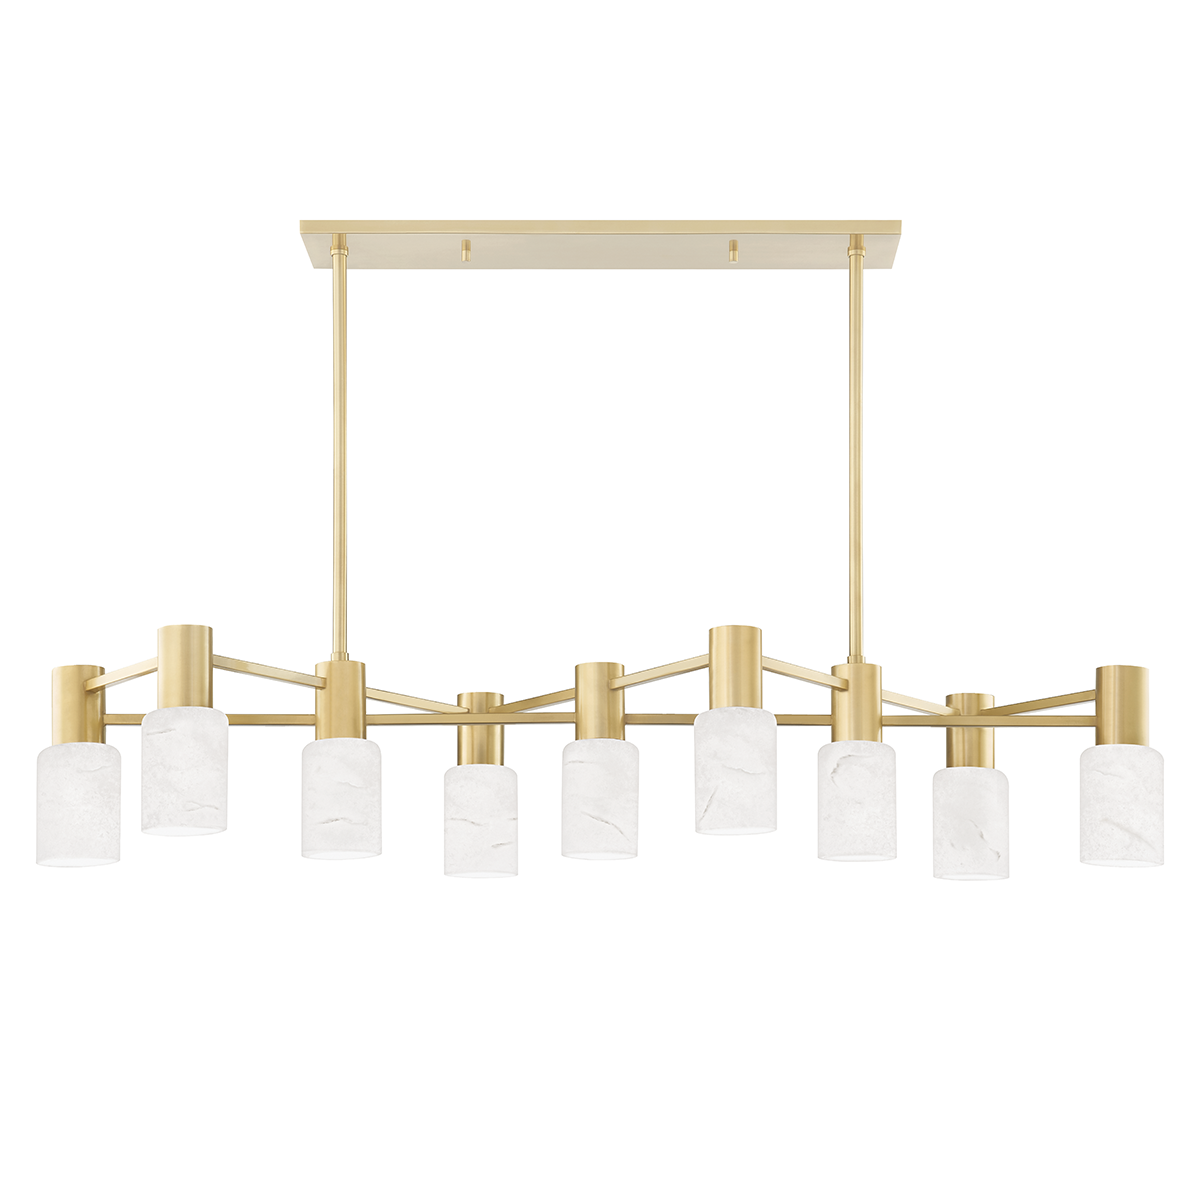 CENTERPORT 4248-AGB | Hudson Valley Lighting Group